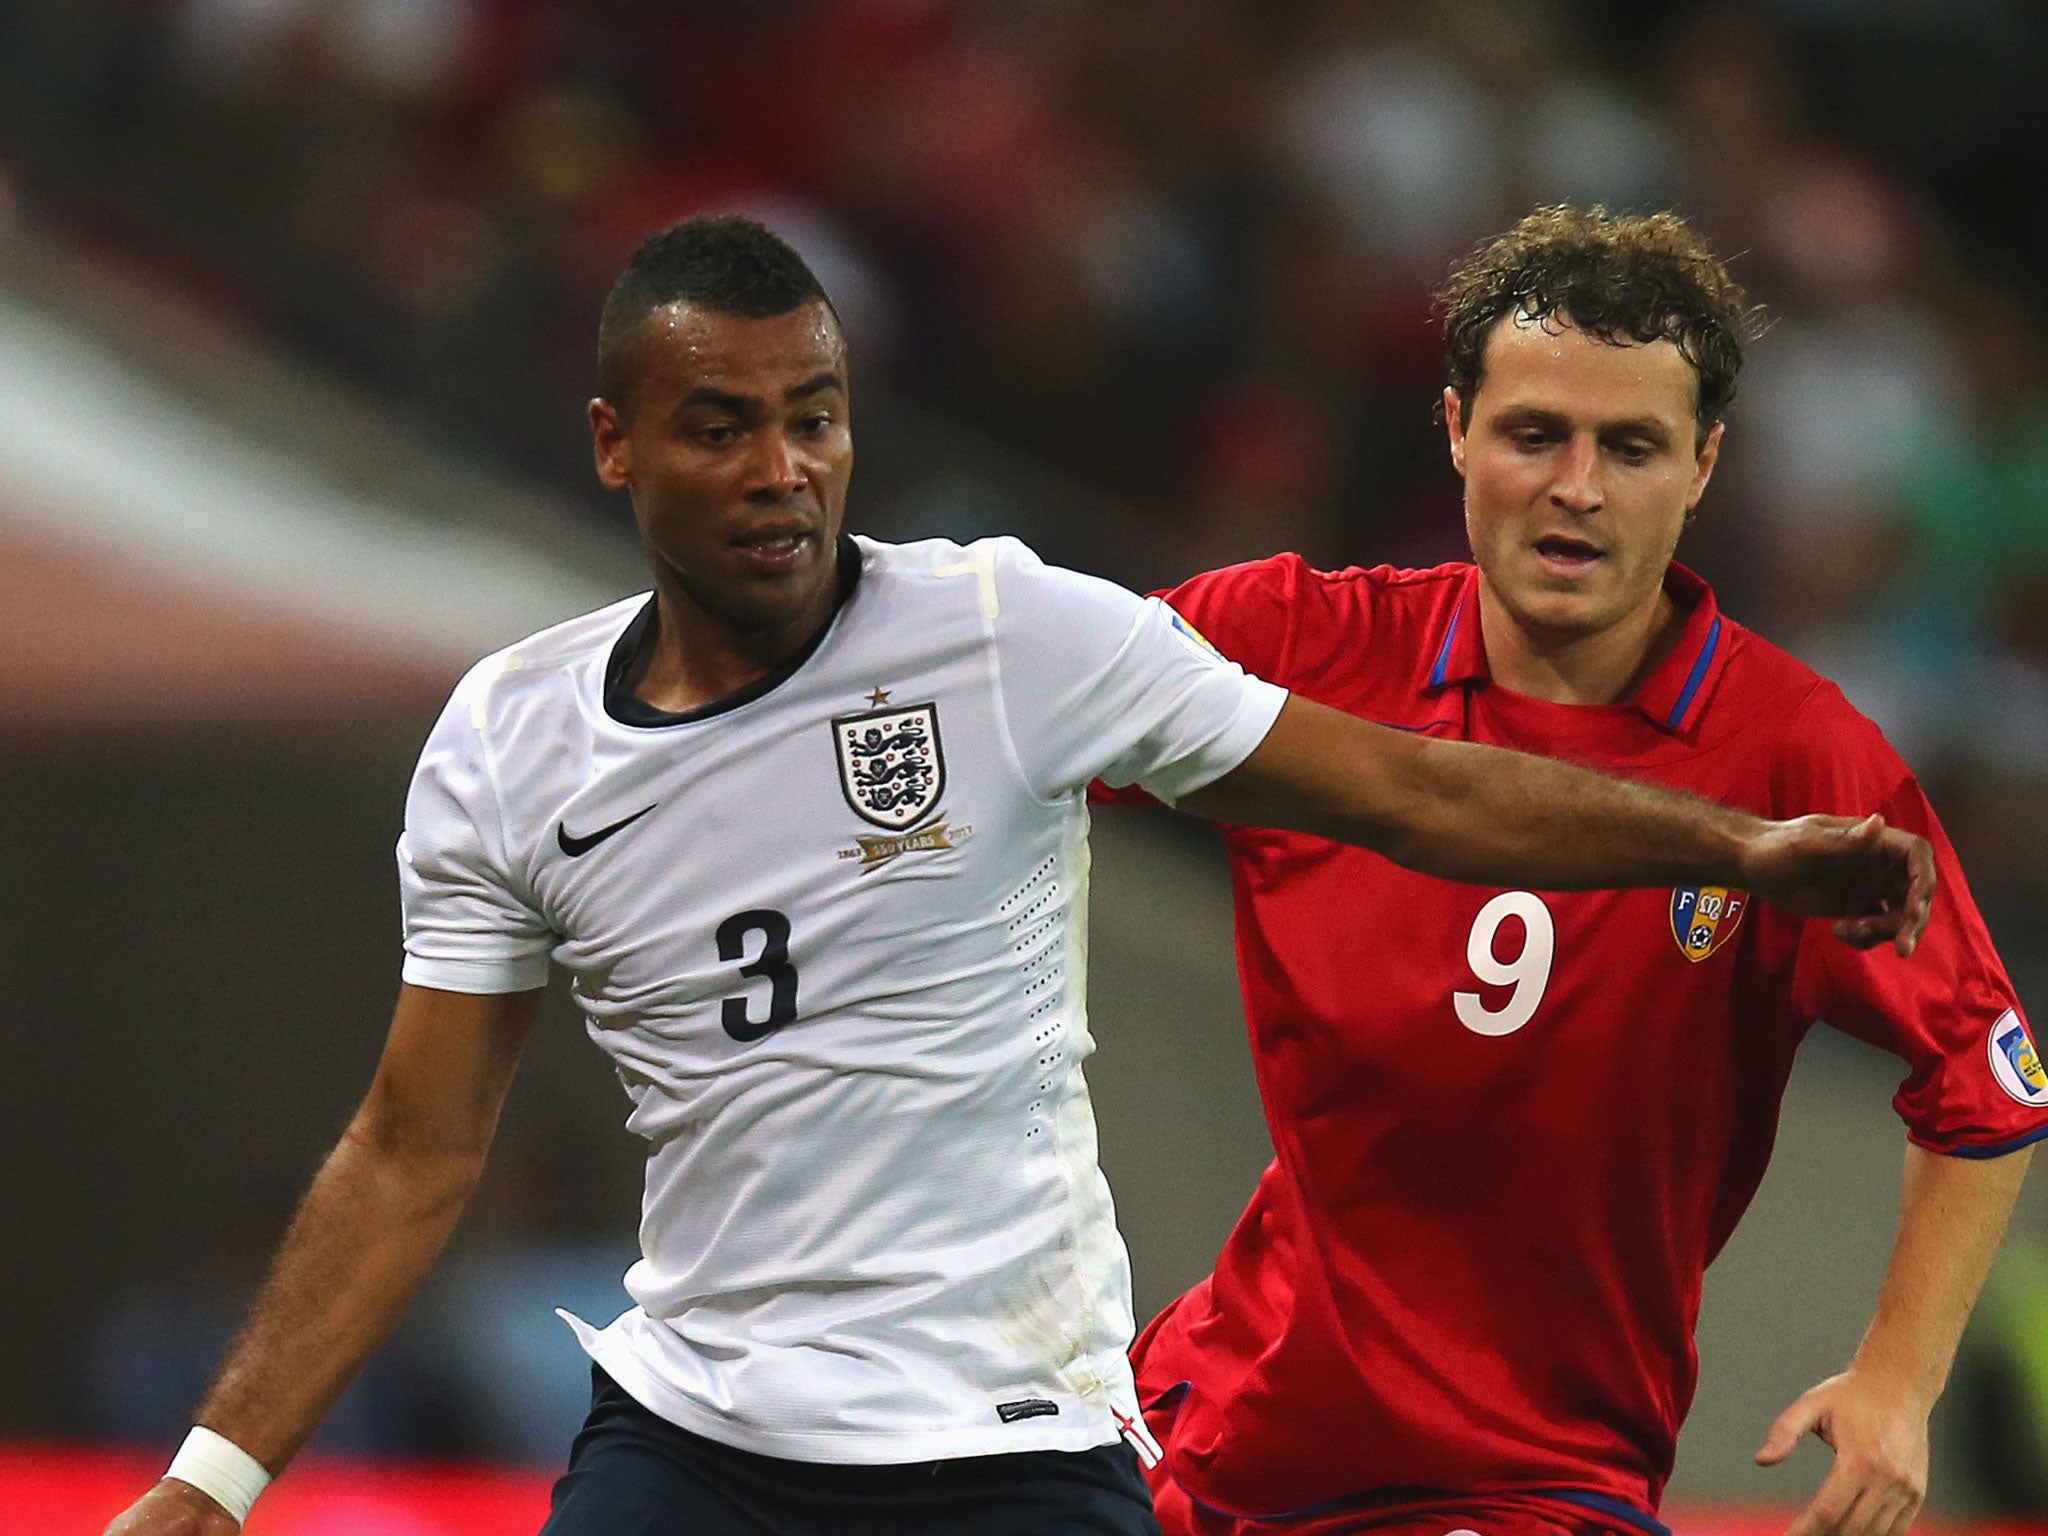 Roy Hodgson is pleased to have the experienced Ashley Cole in his team for the match against Ukraine